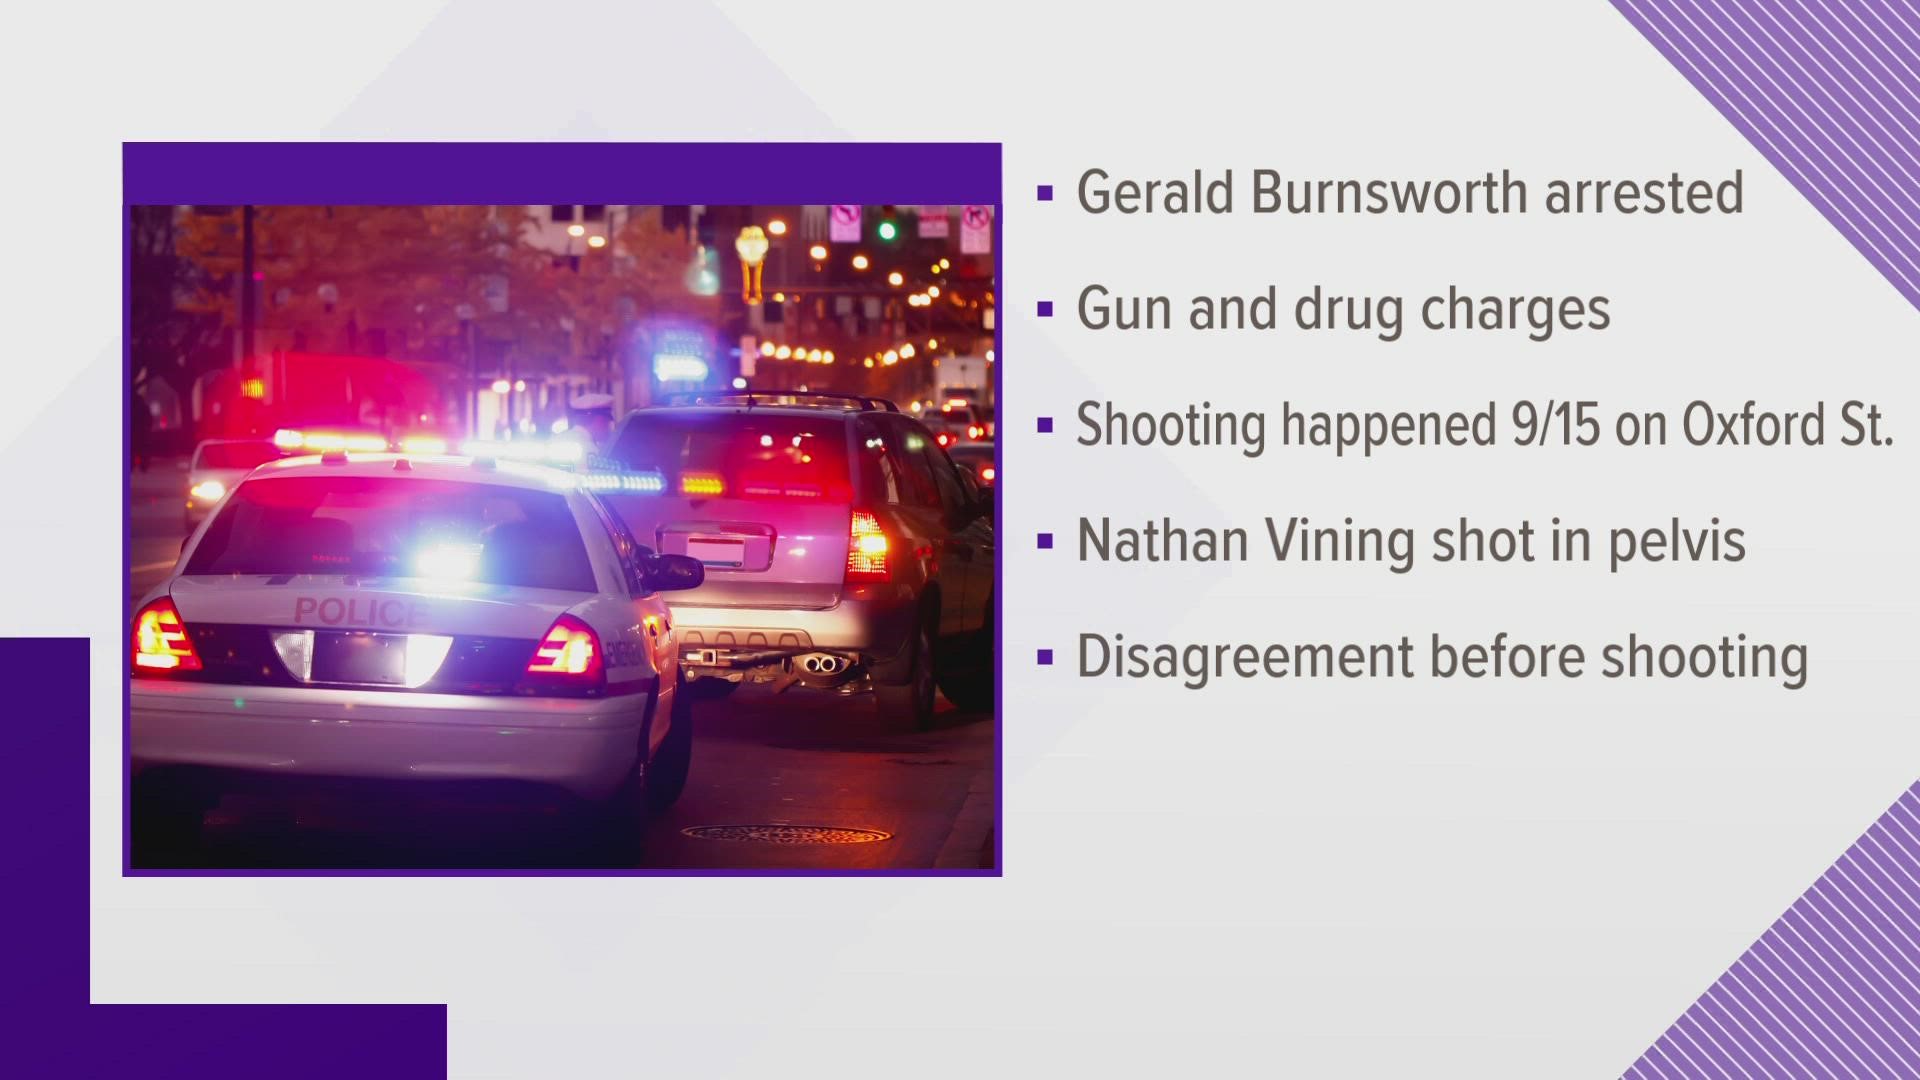 The victim, a 27-year-old Nathan Vining, was shot in the pelvis, police said.